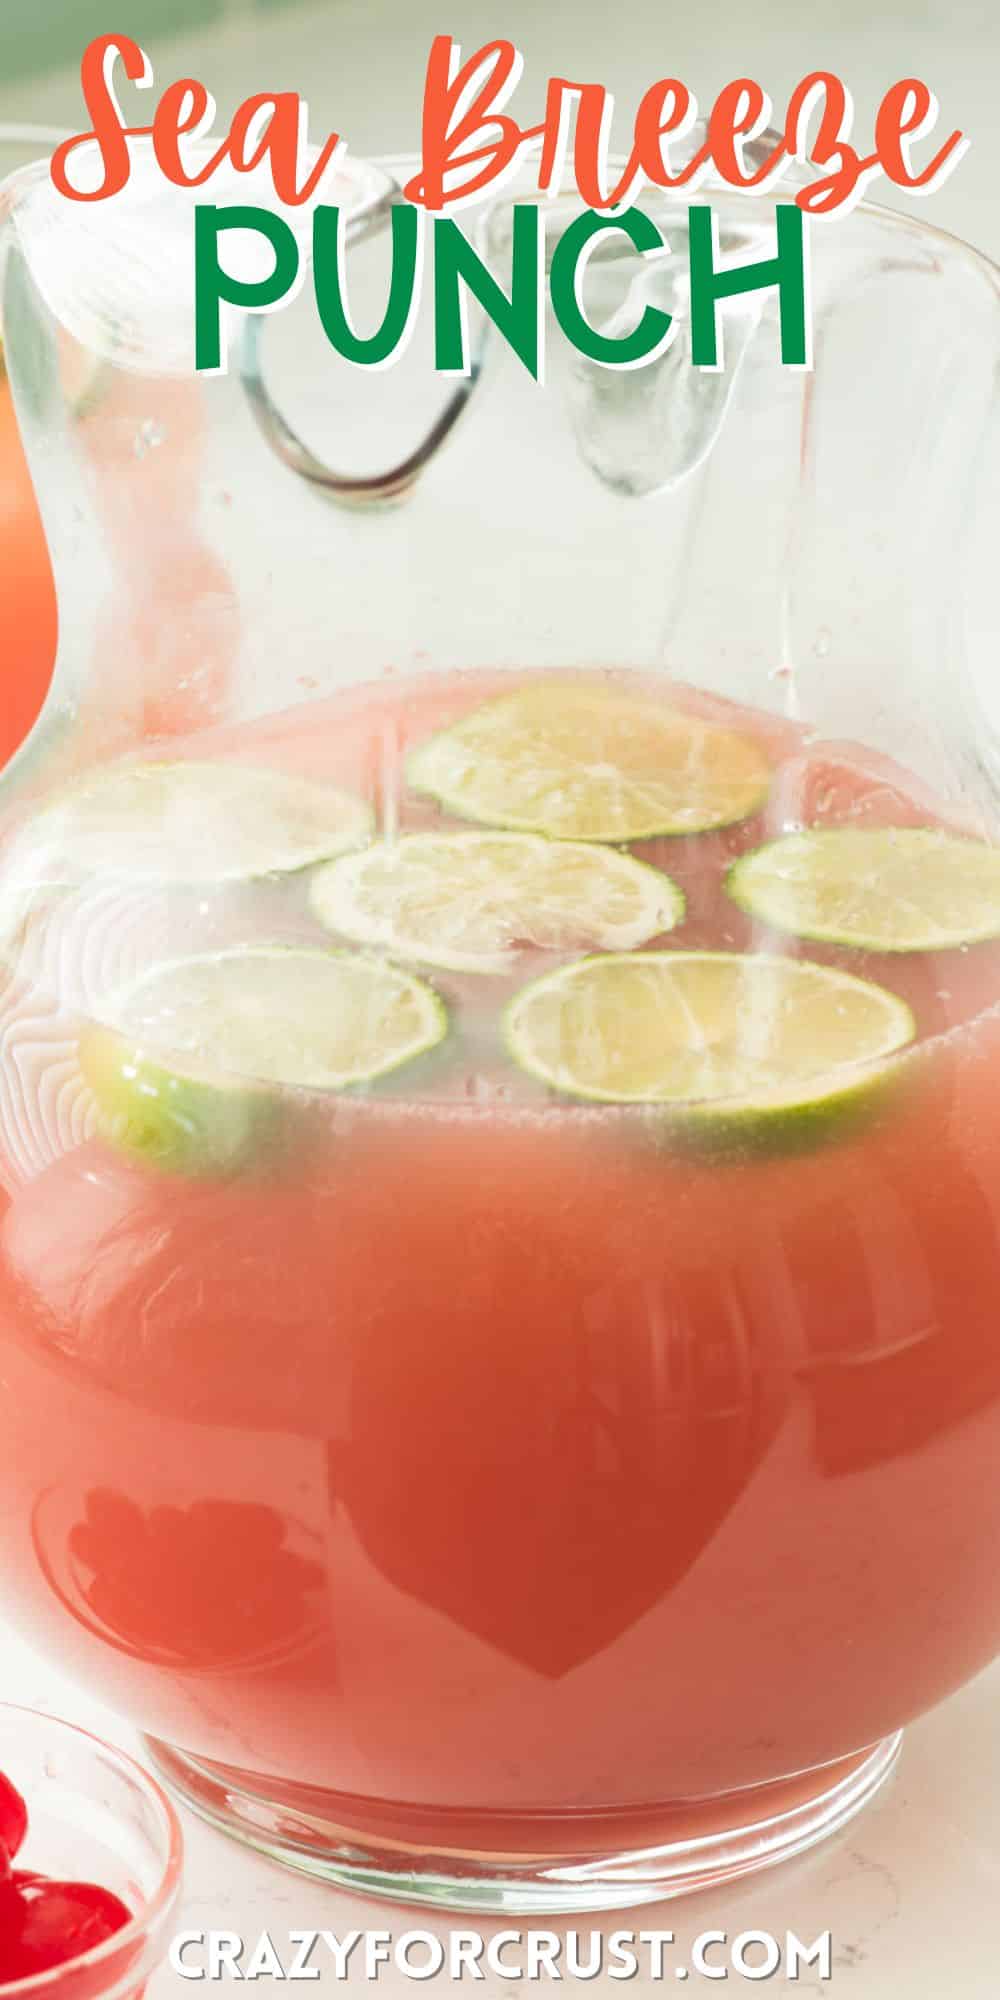 pink drink in a clear big pitcher with sliced limes inside with words on the image.